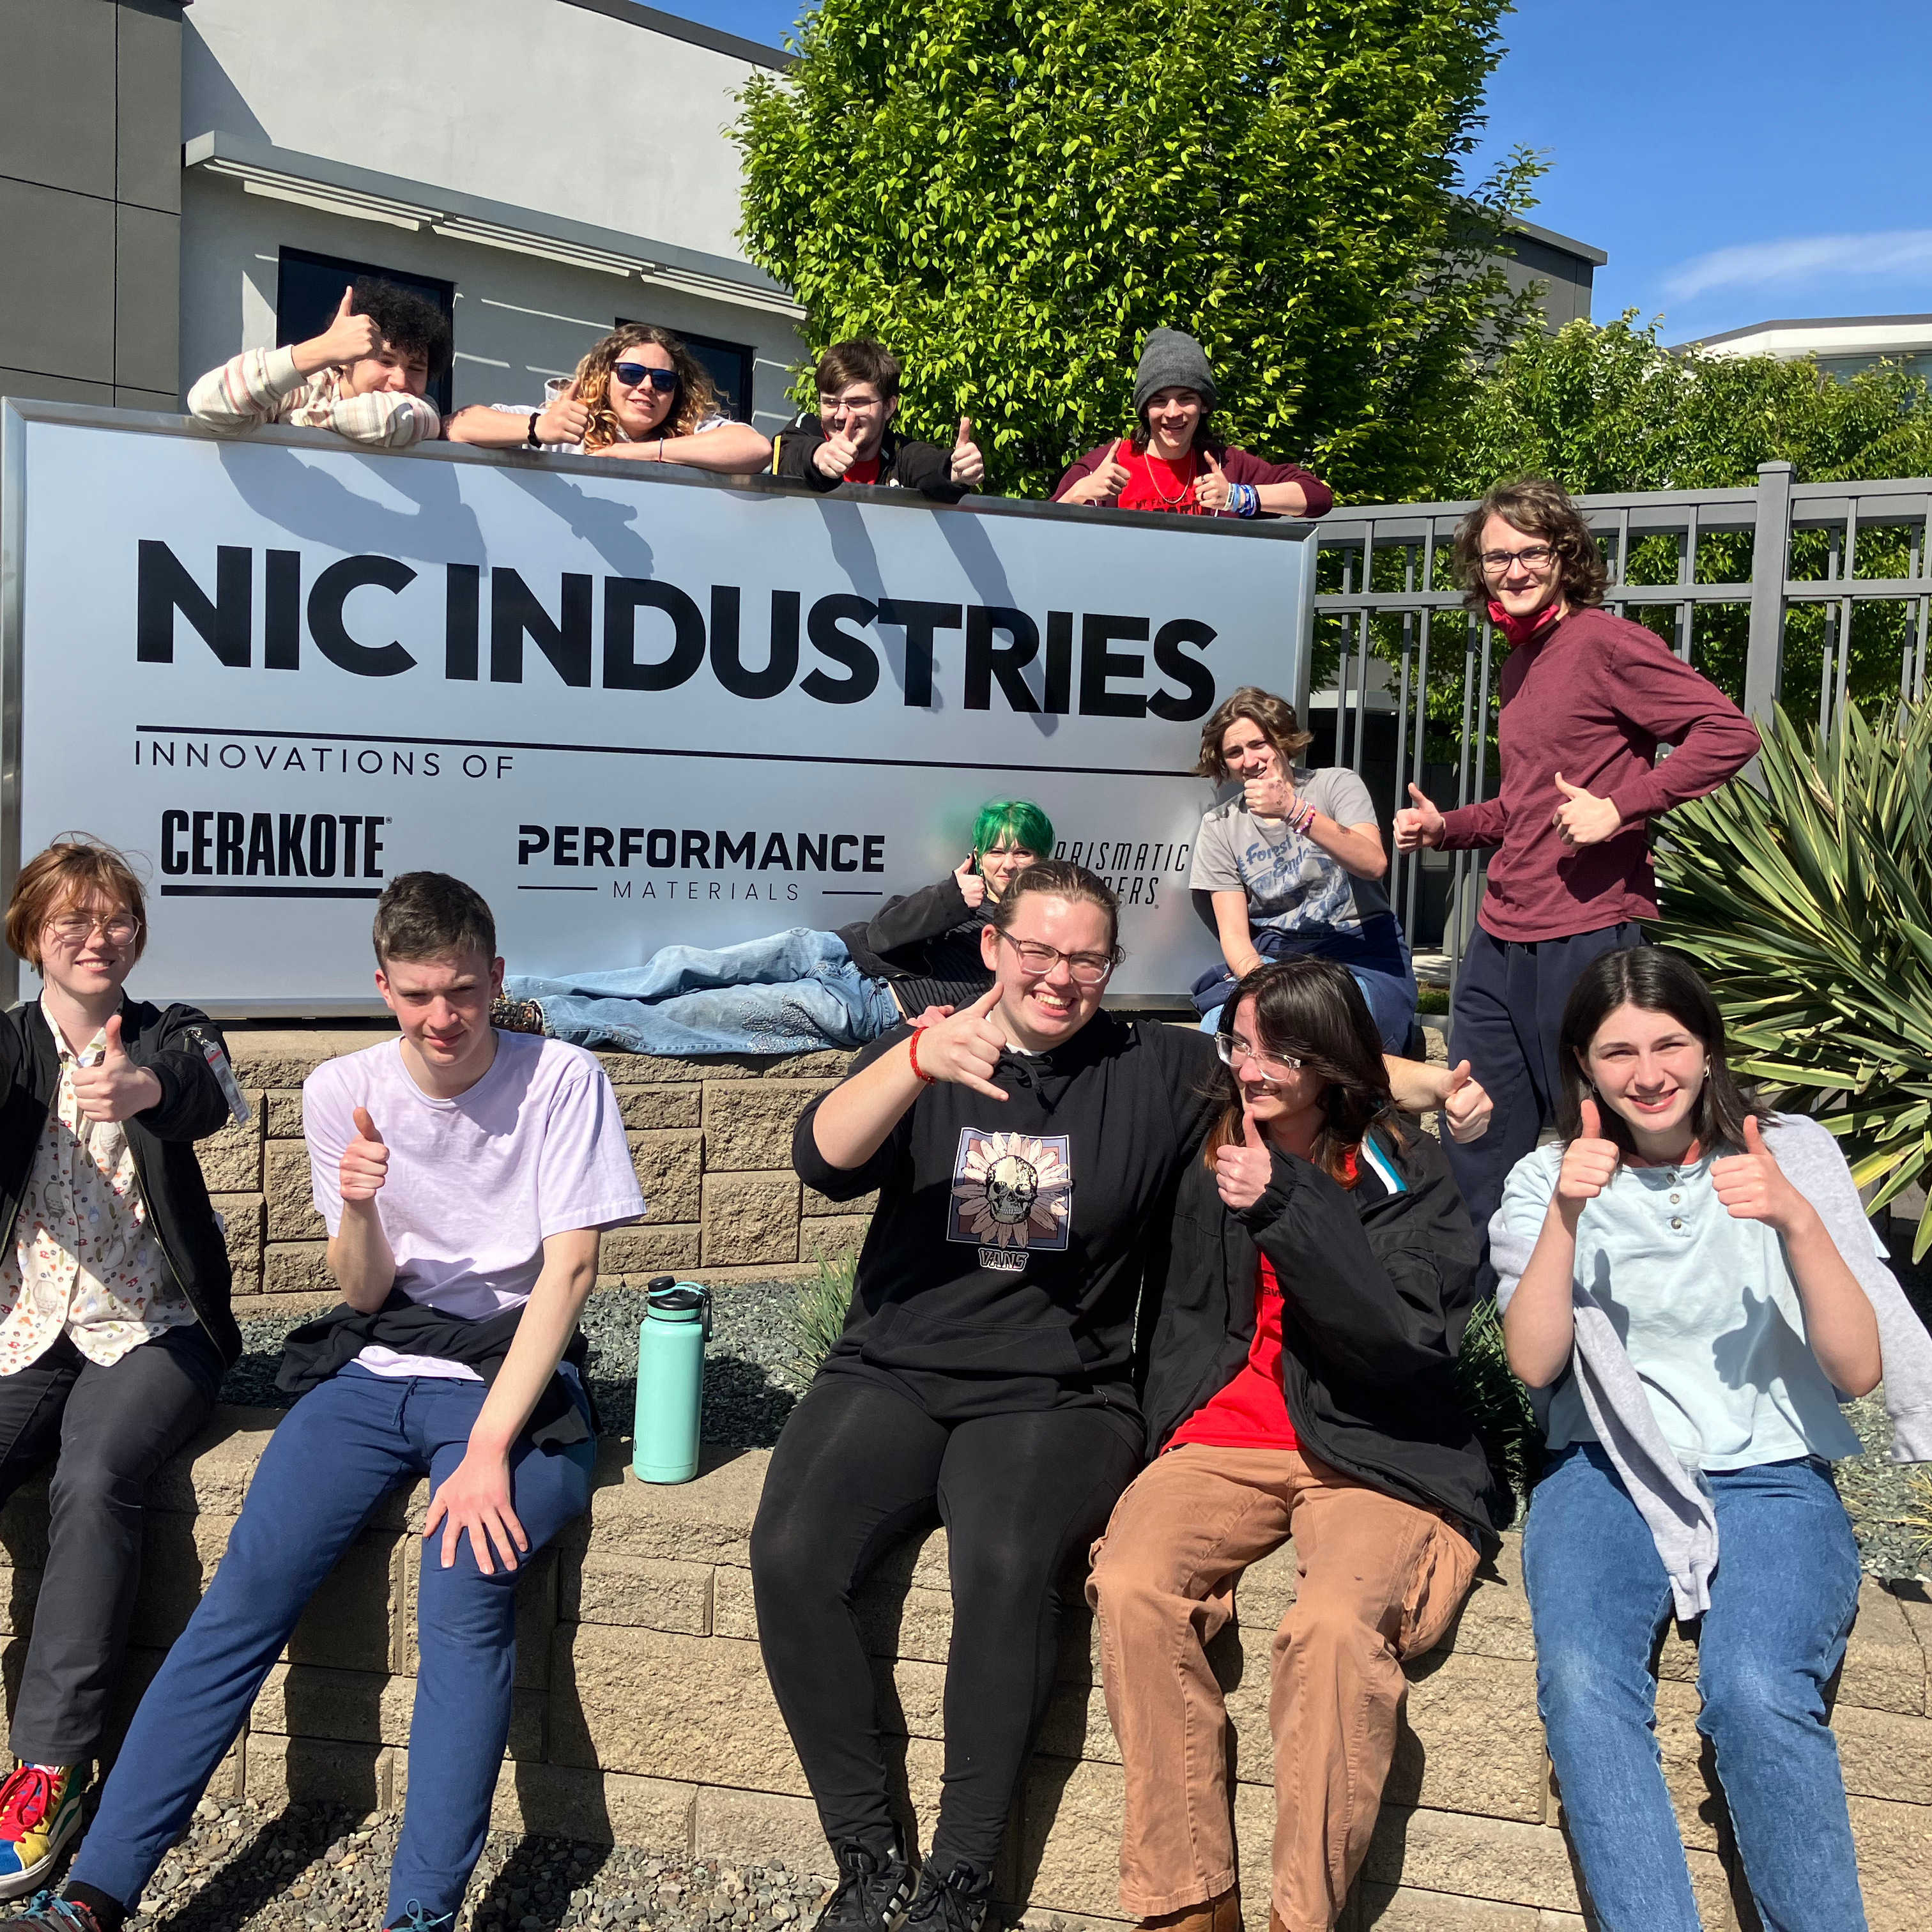 group photo pf students around sign for NIC Industries